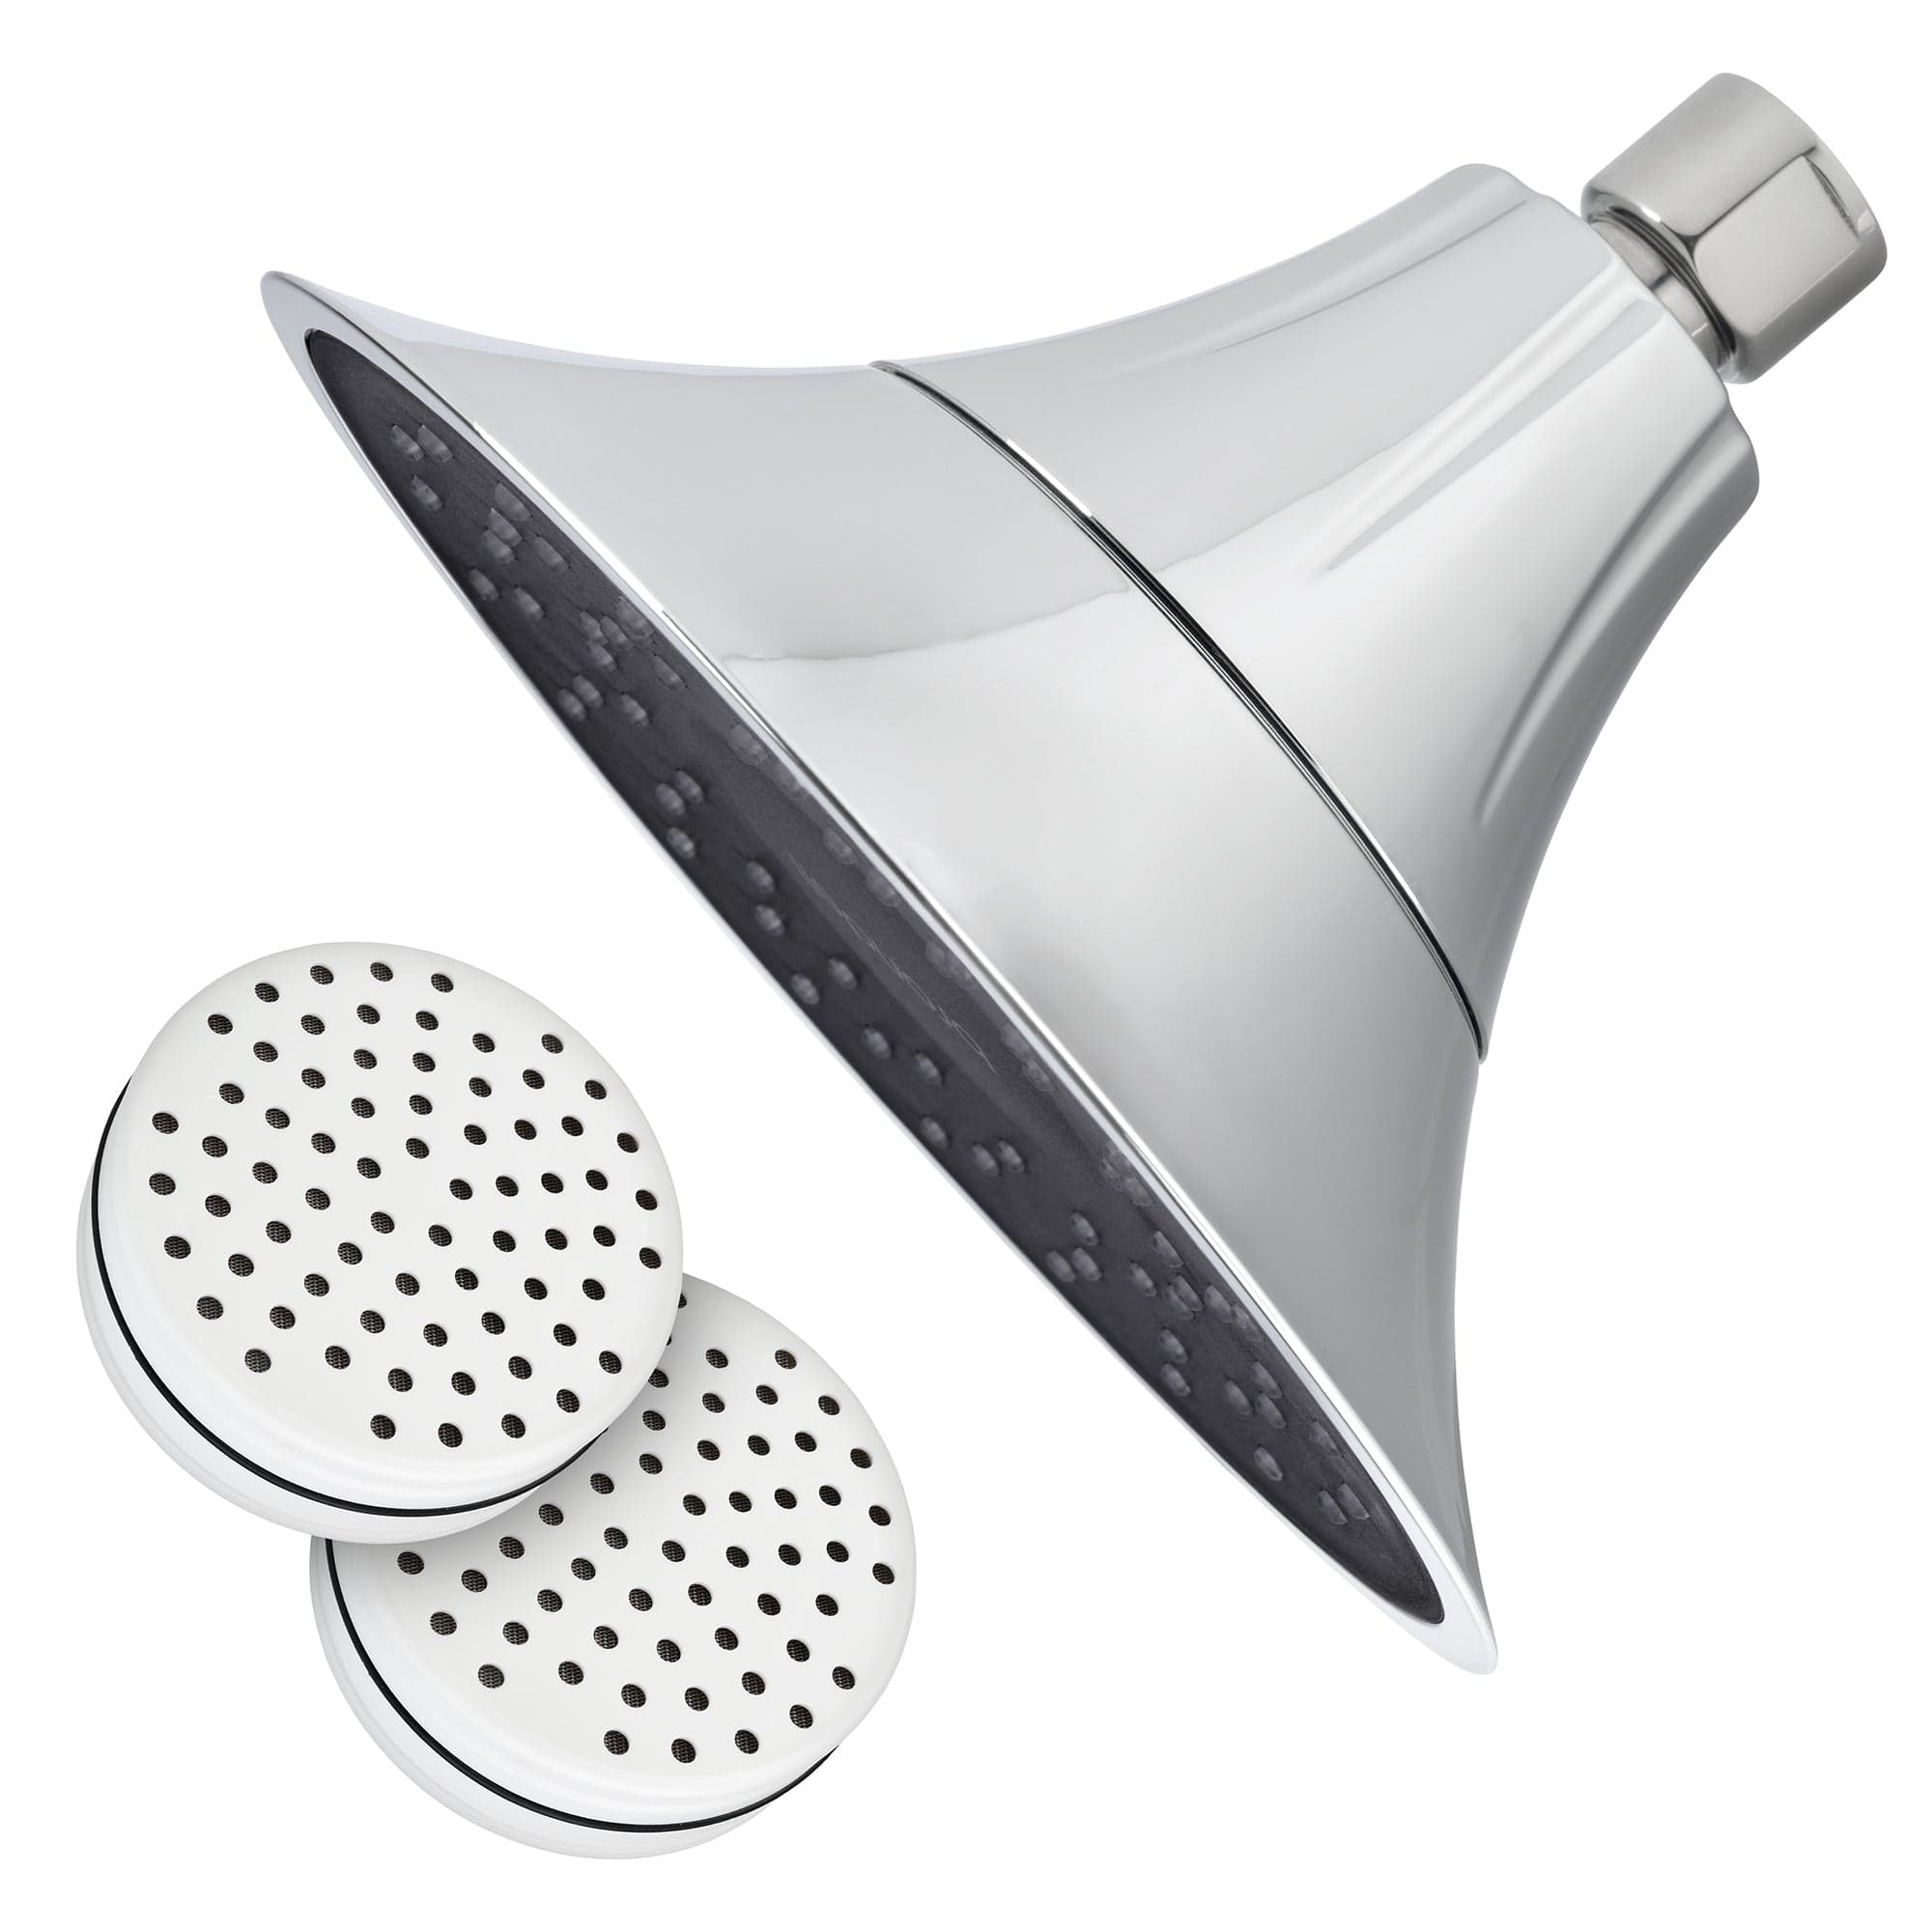 VivaSpring Filtered Showerhead in Chrome with Obsidian Face - Molaix819911012718VIVASPRING FILTERED SHOWER HEADFSH25-CB